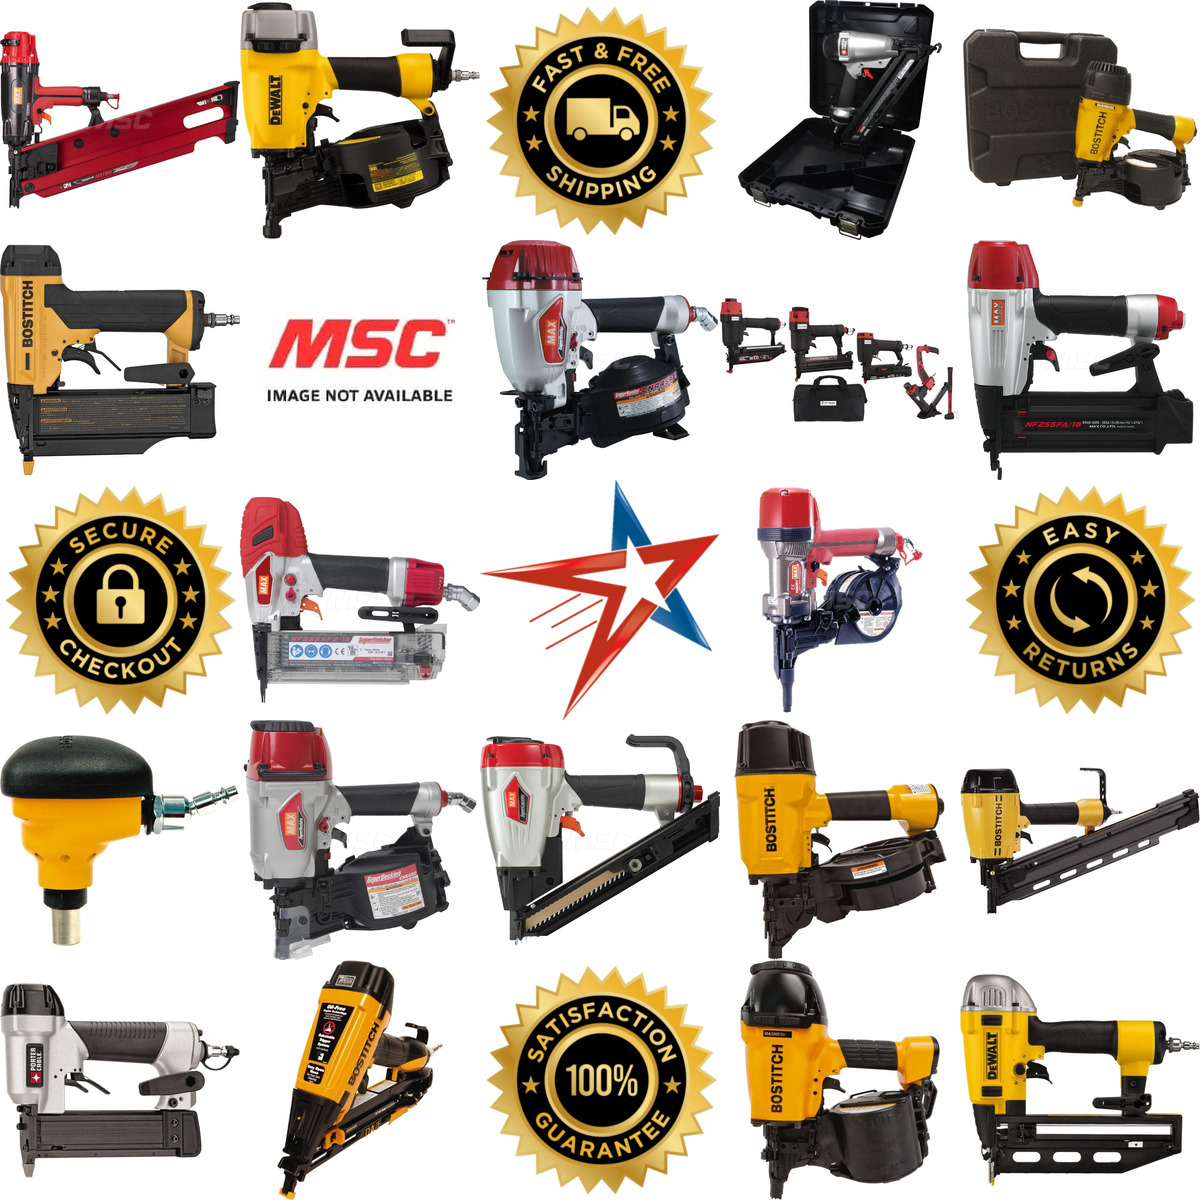 A selection of Air Nailers products on GoVets